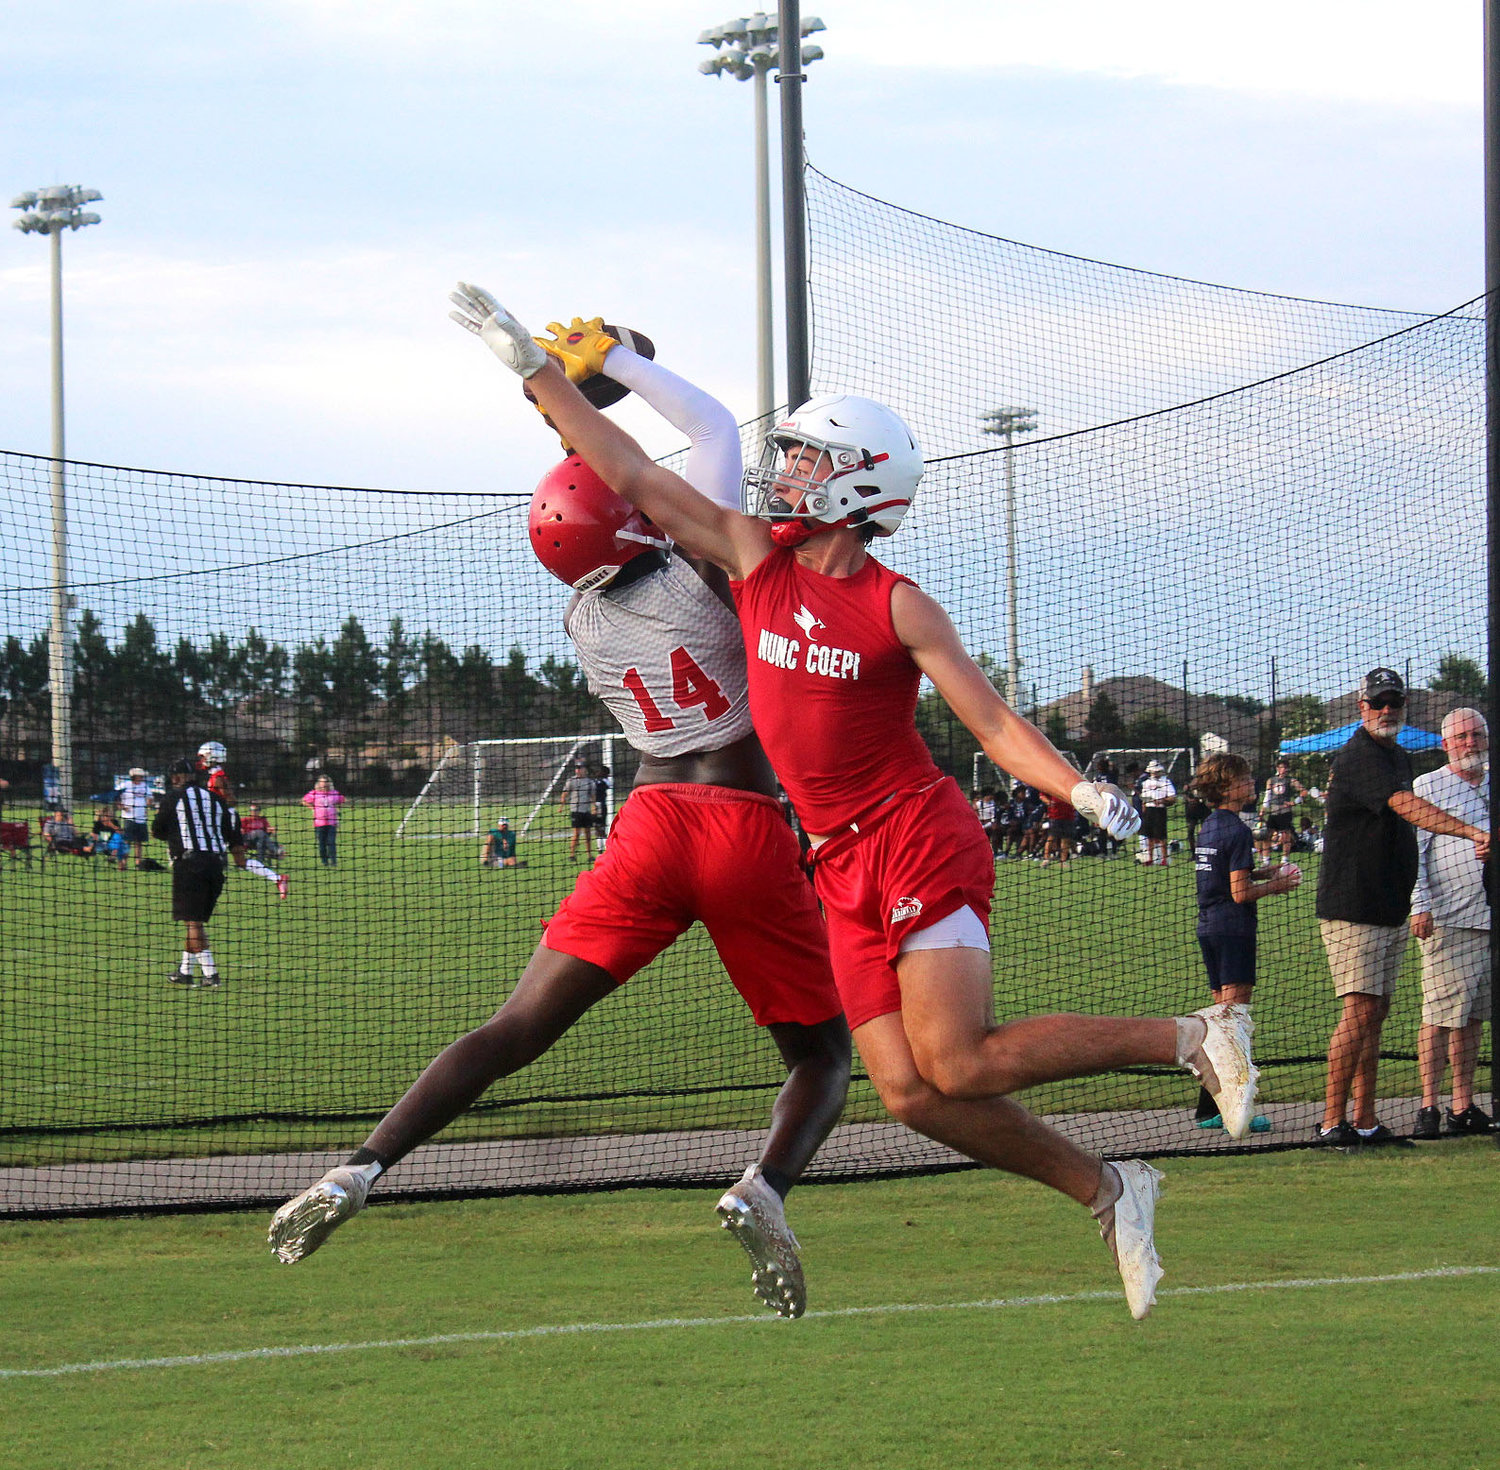 Nearly two dozen teams competed in the Foley 7-on-7 Showdown at the Foley Sports Tourism Complex last week at OWA. The Hewitt-Trussville Huskies and St. Michael Catholic Cardinals competed in Pool 2 on day one of competition last Wednesday, June 29.